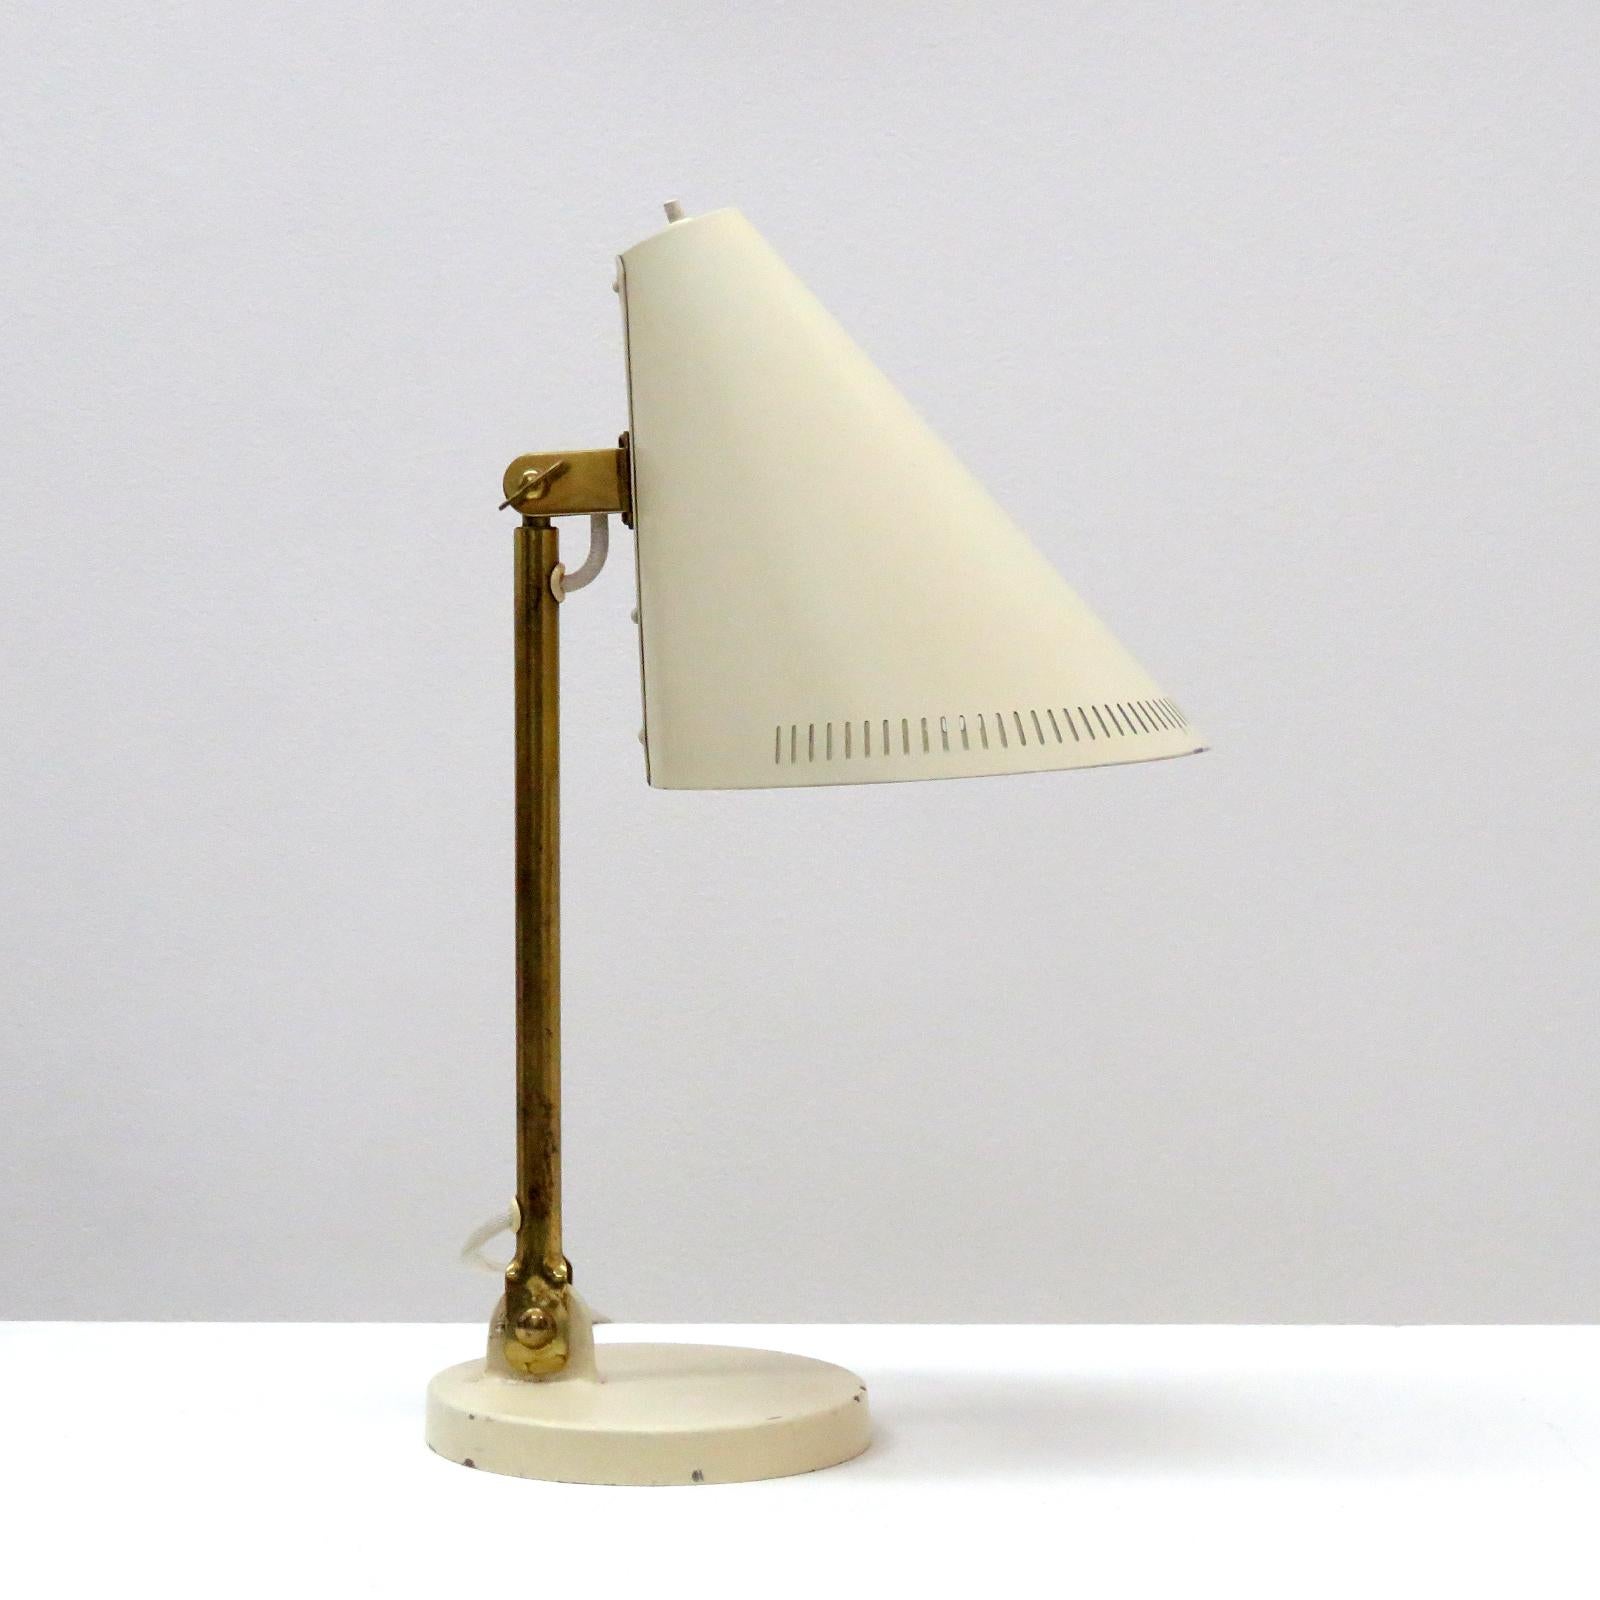 Scandinavian Modern Desk Lamp by Paavo Tynell for Taito, 1950 For Sale